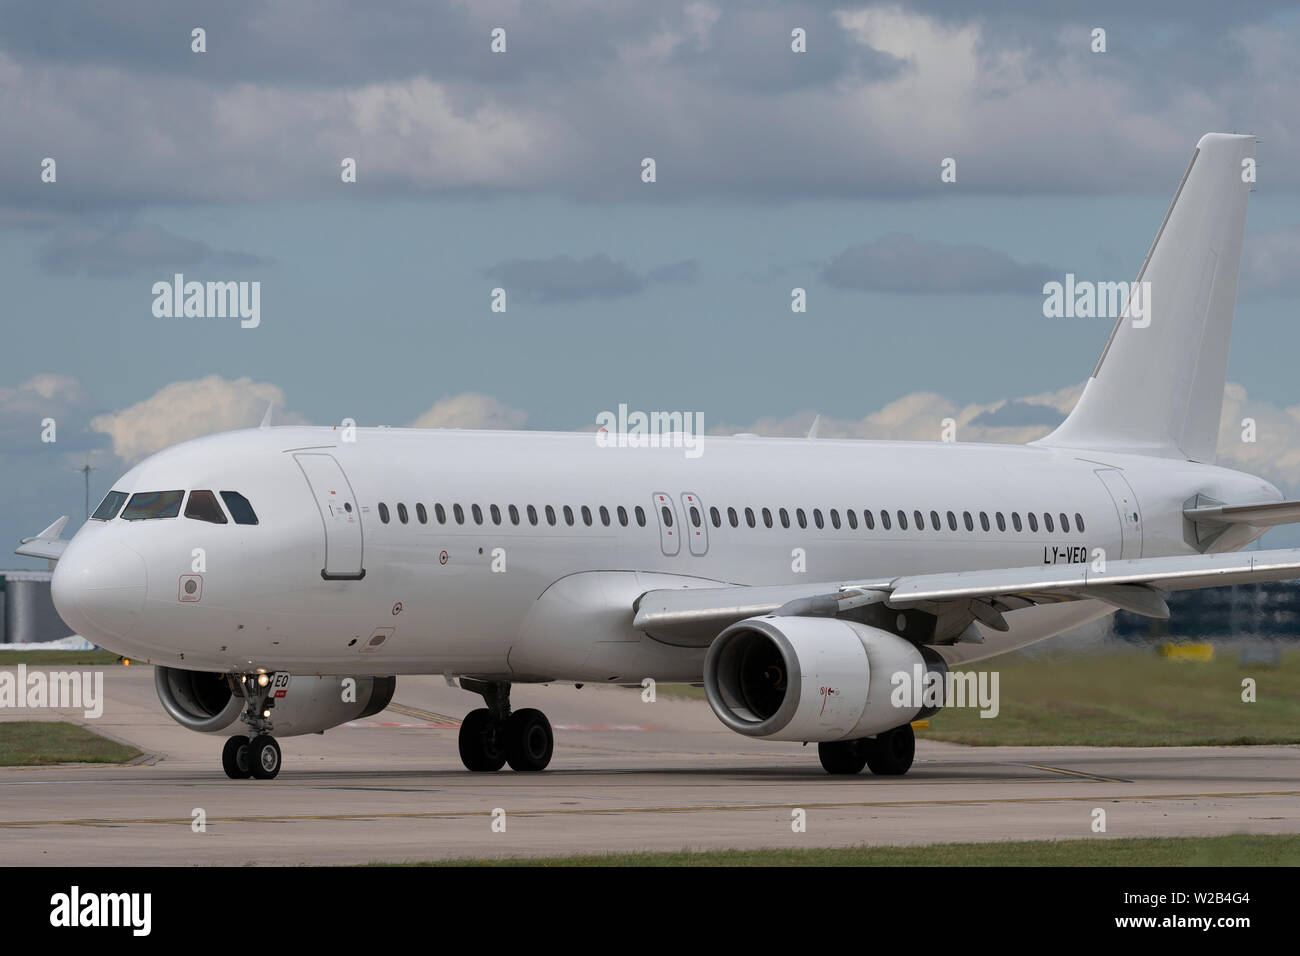 A Sun Express Airbus A320-200 taxis on the runway at Manchester Airport, UK. Stock Photo